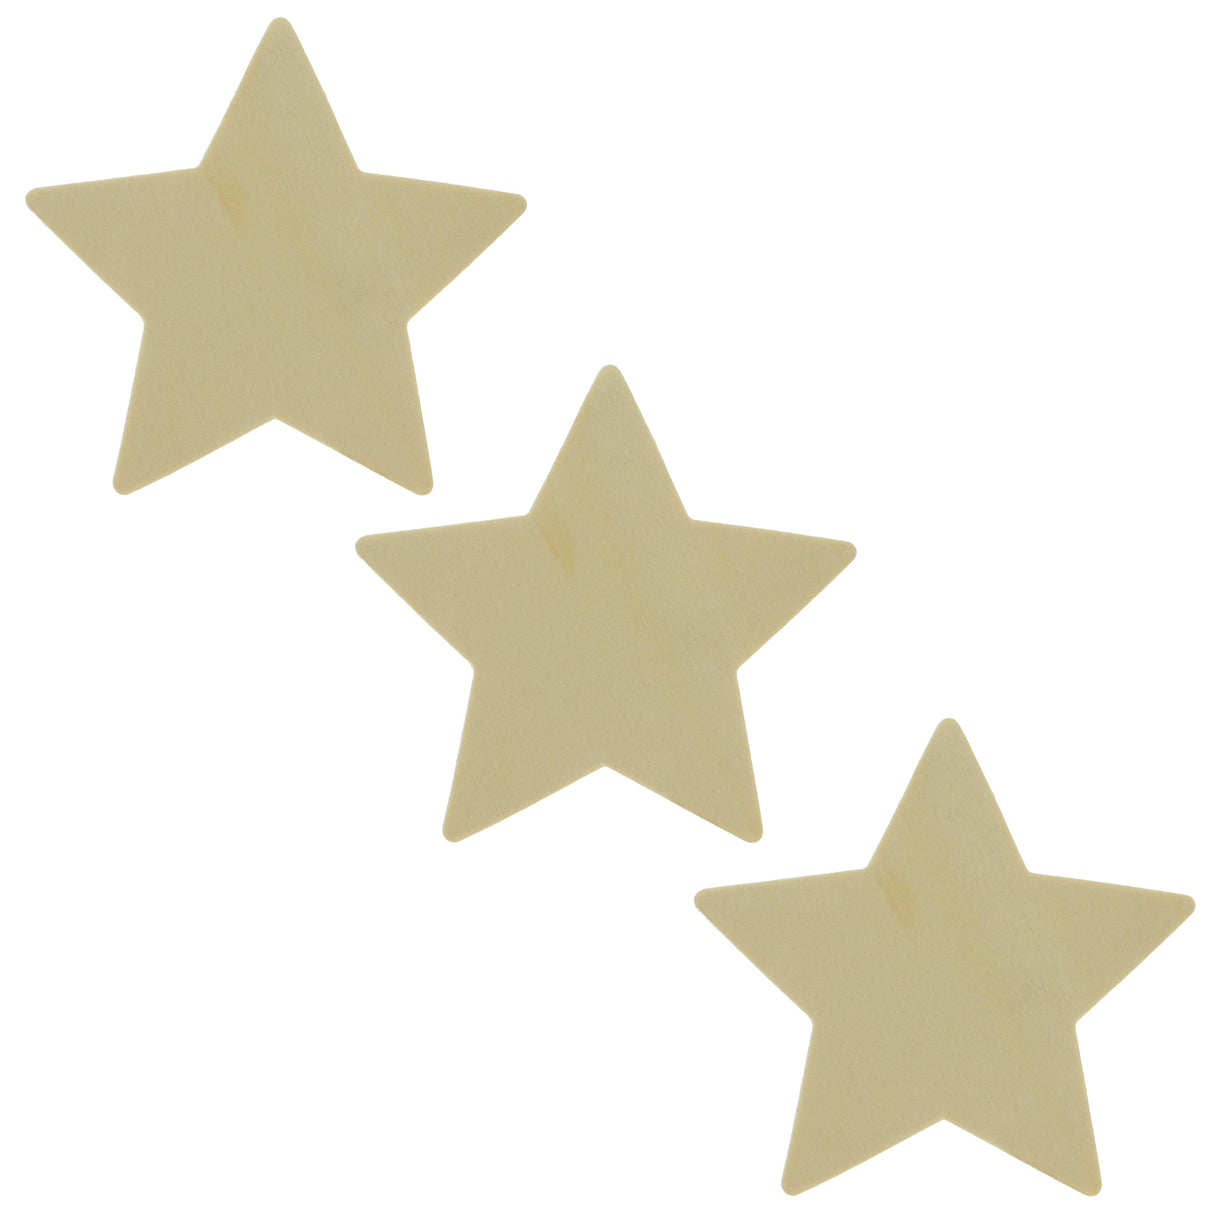 Set of 3 Unfinished Wooden Star Shape Cutout DIY Craft 3.5 Inches in Beige color, Star shape